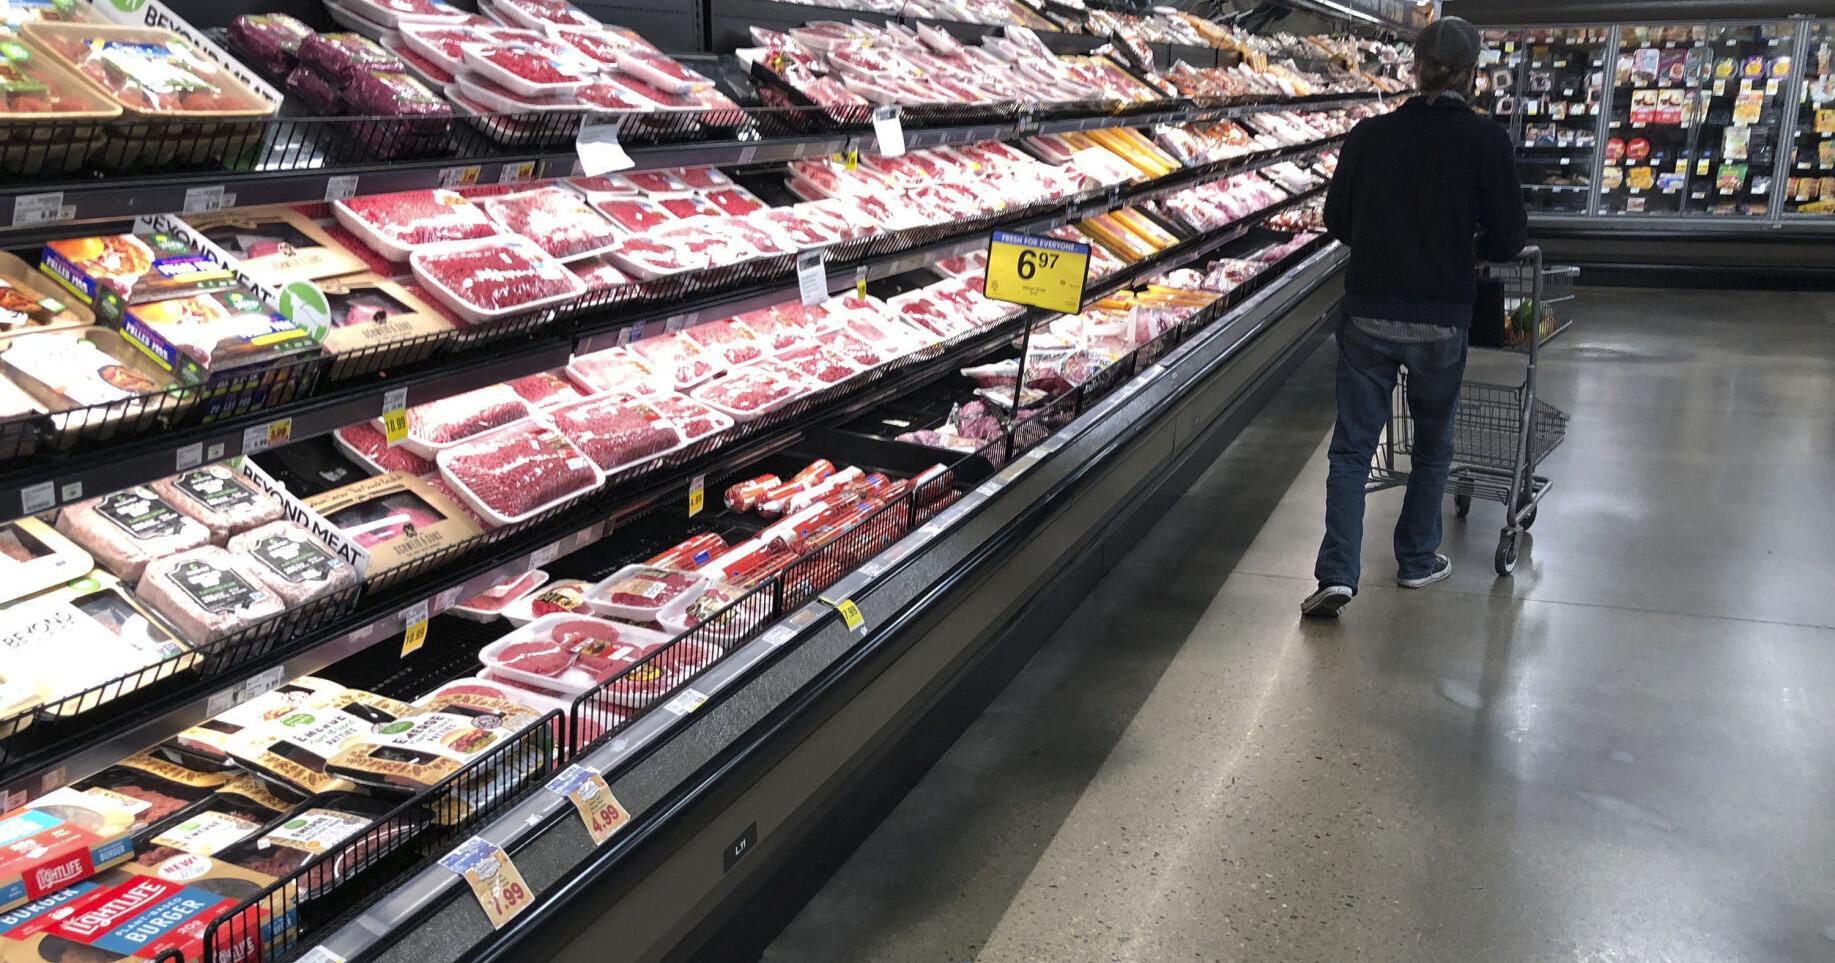 Meat back on the table for SNAP users; so are new rules